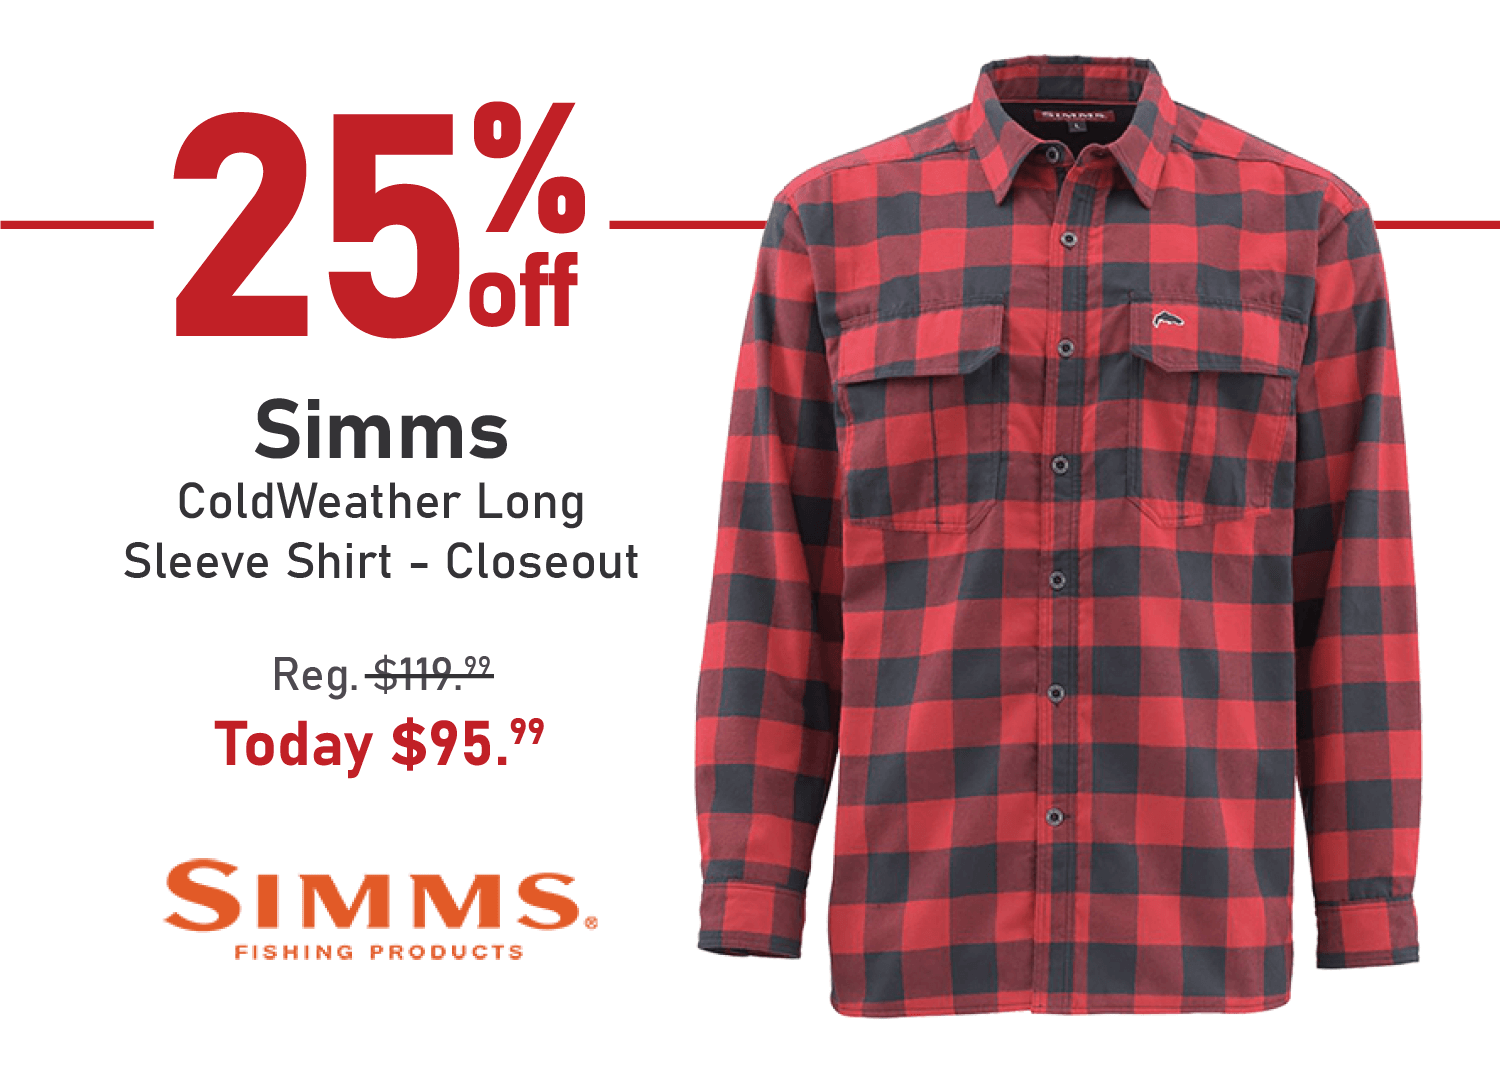 Save 25% on the Simms ColdWeather Long Sleeve Shirt - Closeout